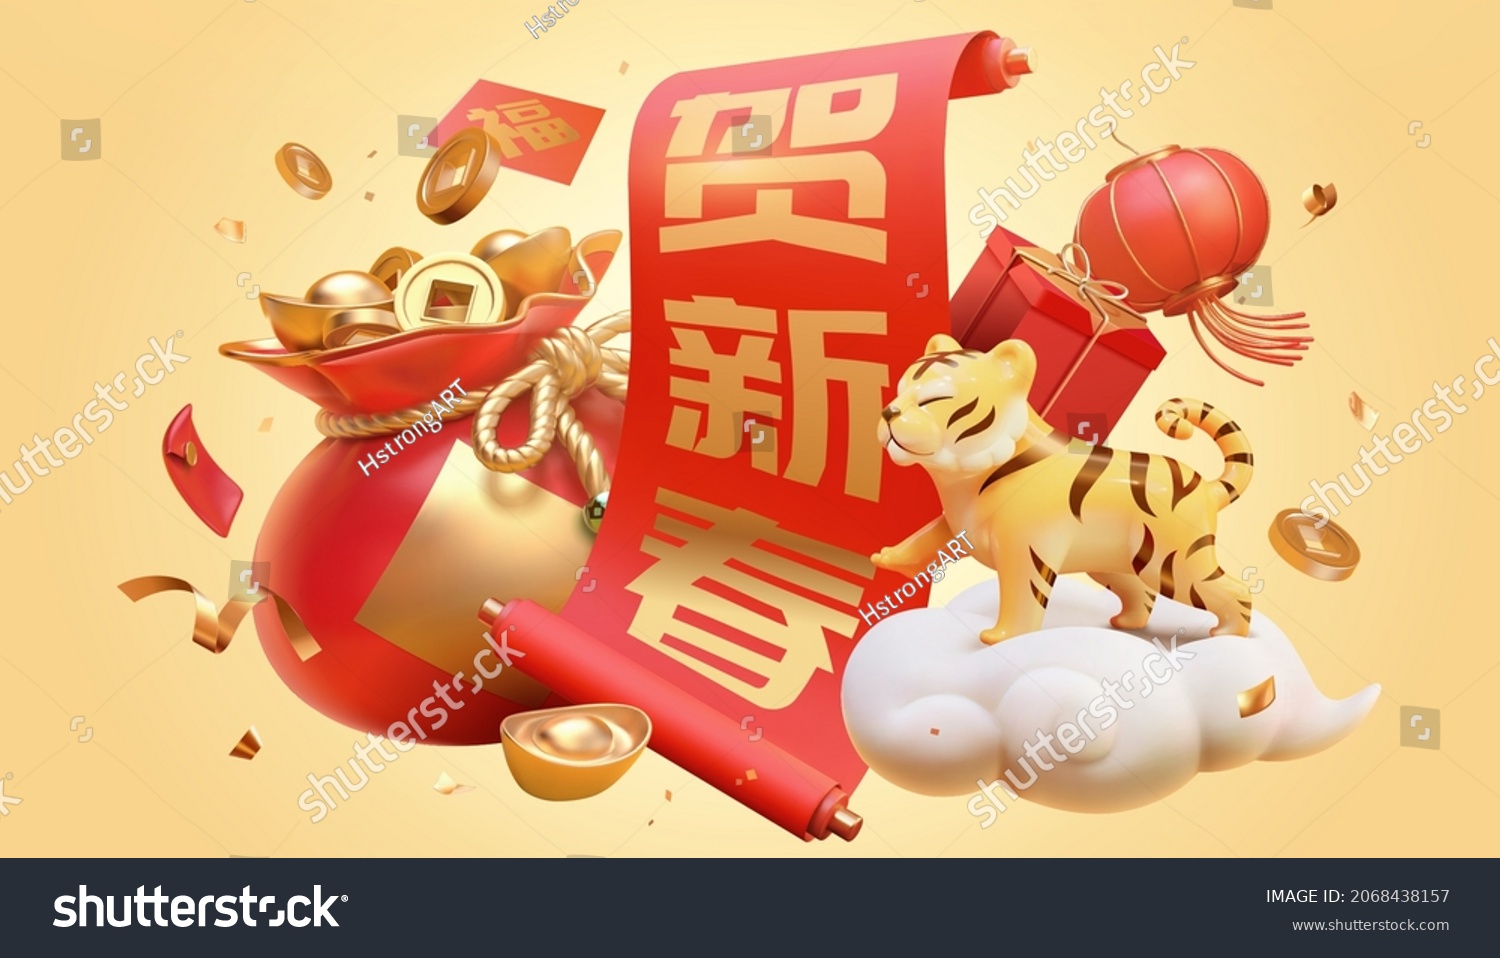 3d CNY tiger zodiac scene design. Composition of fortune bag, greeting scroll, gift boxes and cute tiger toy standing on cloud. Text: Happy Chinese new year #2068438157